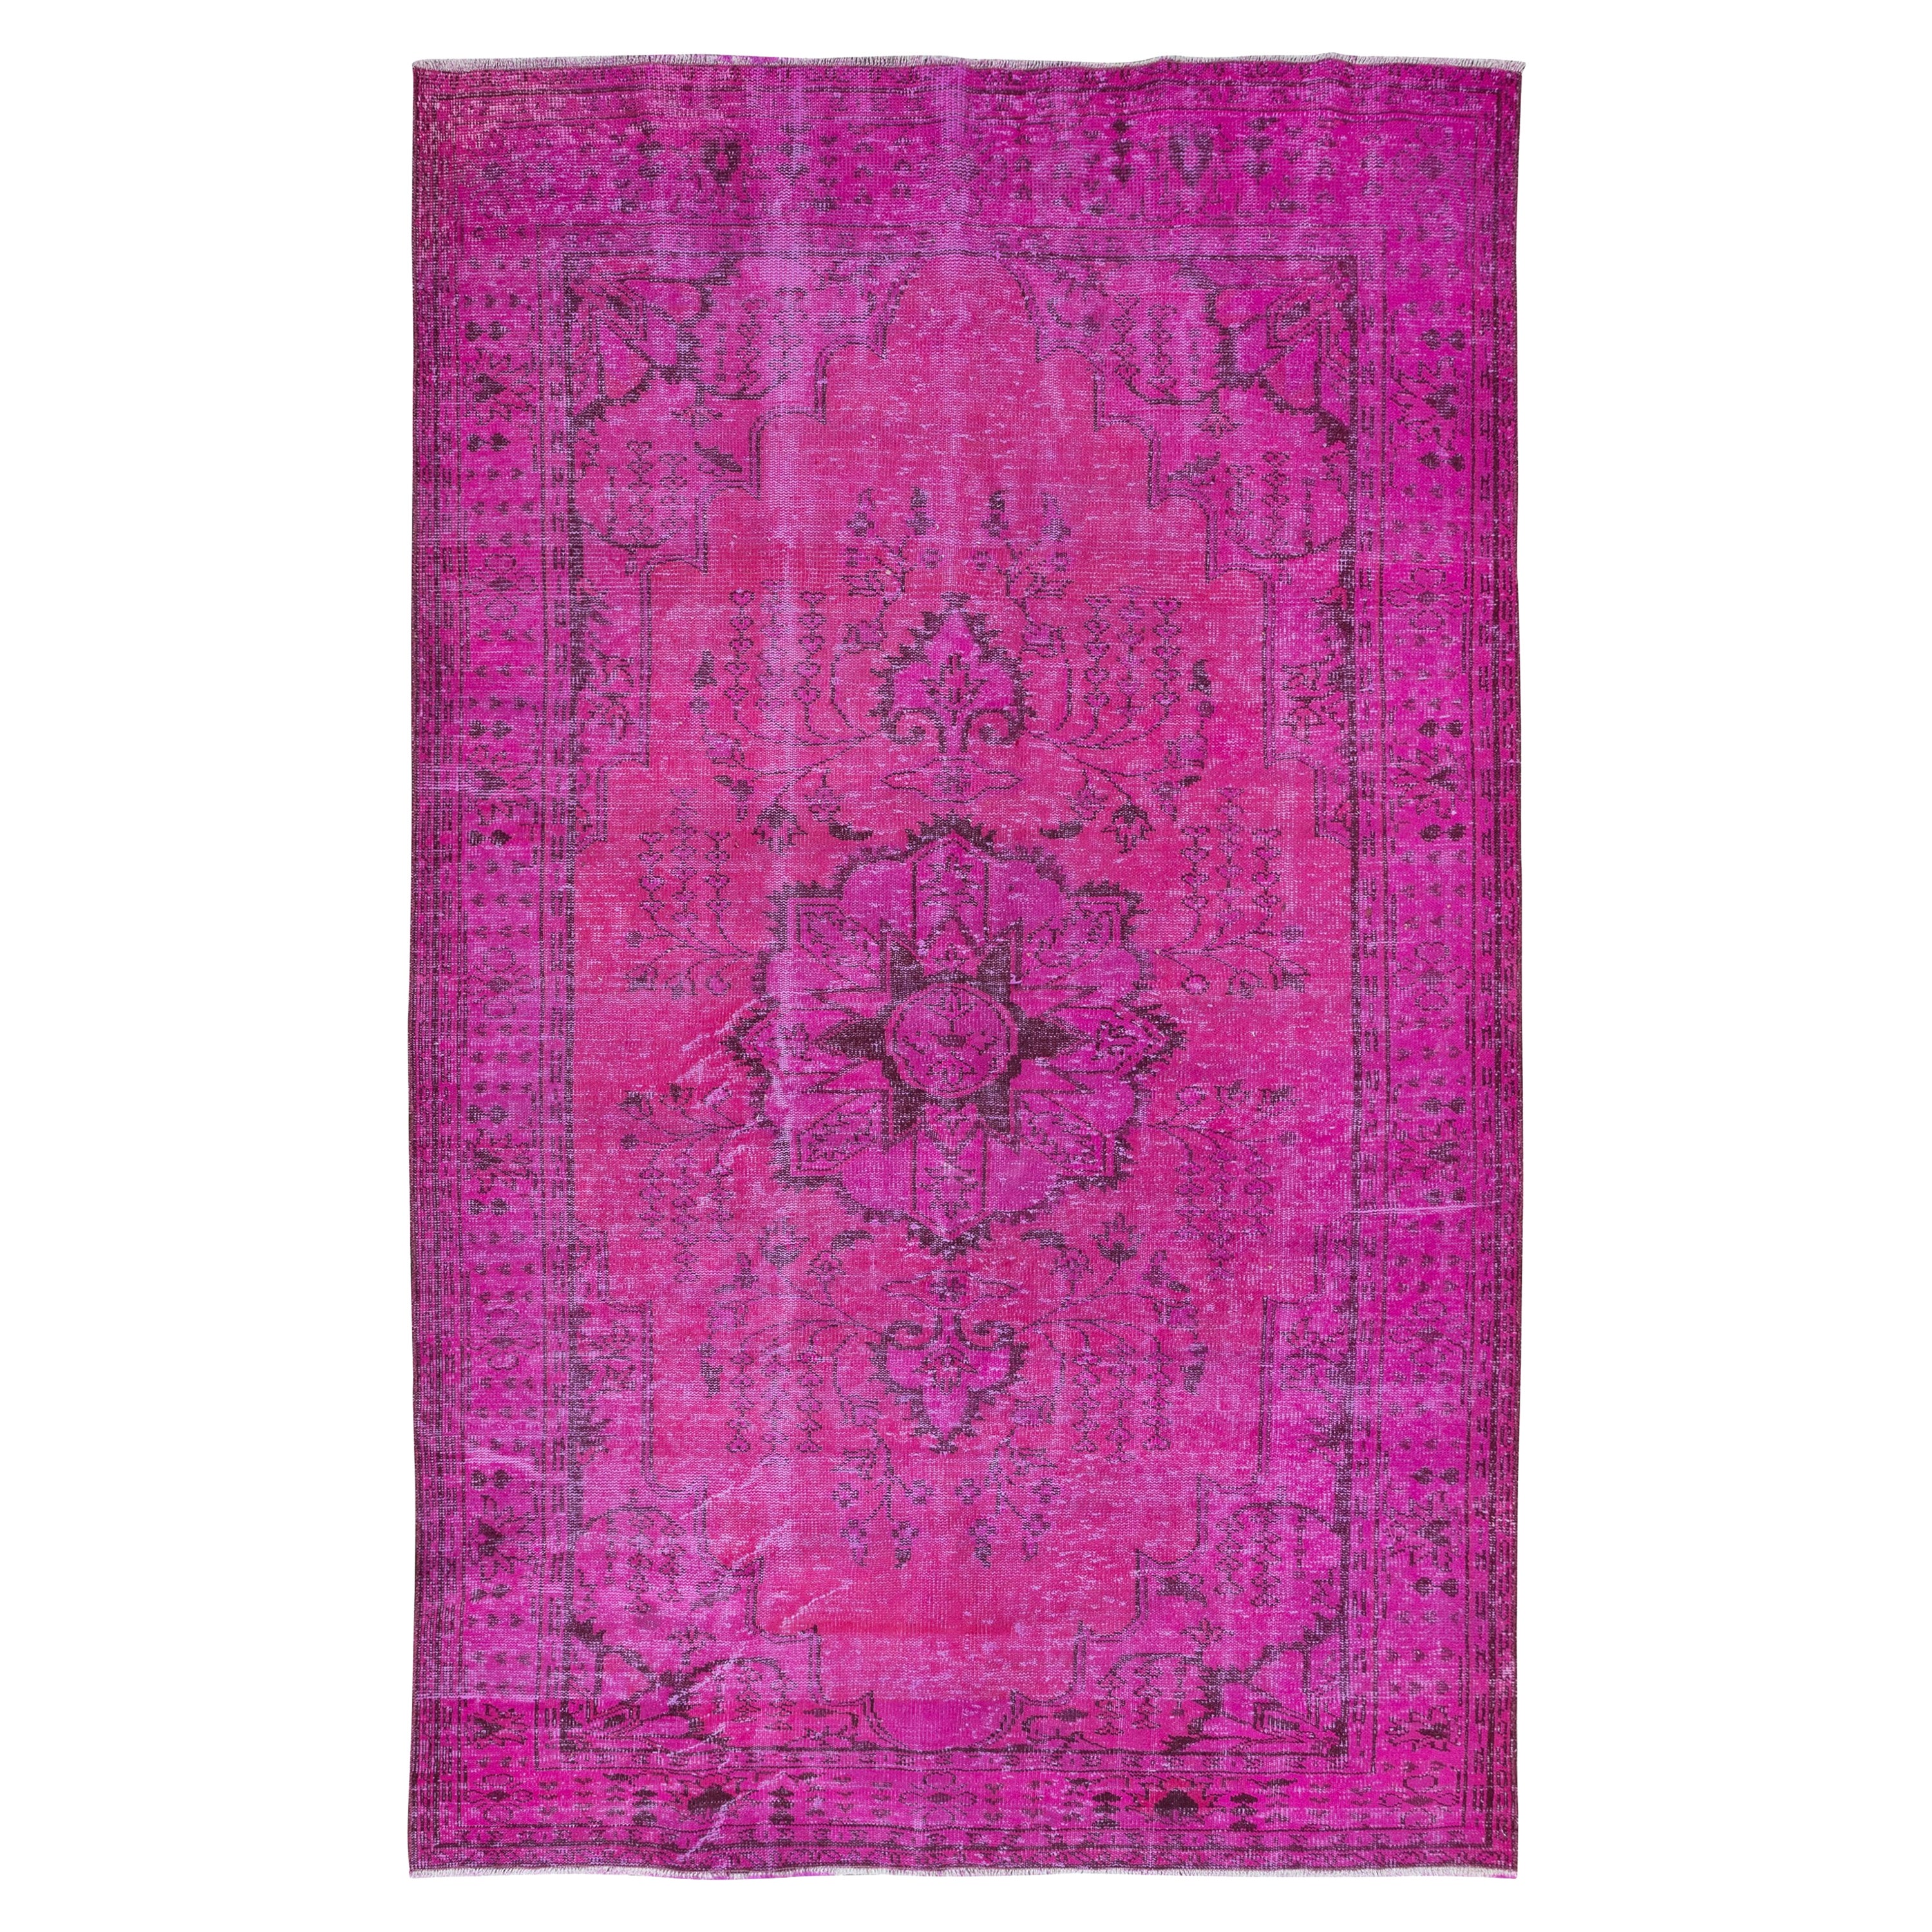 6x9.7 Ft Hand-Made Turkish Area Rug in Pink, Modern Wool and Cotton Carpet